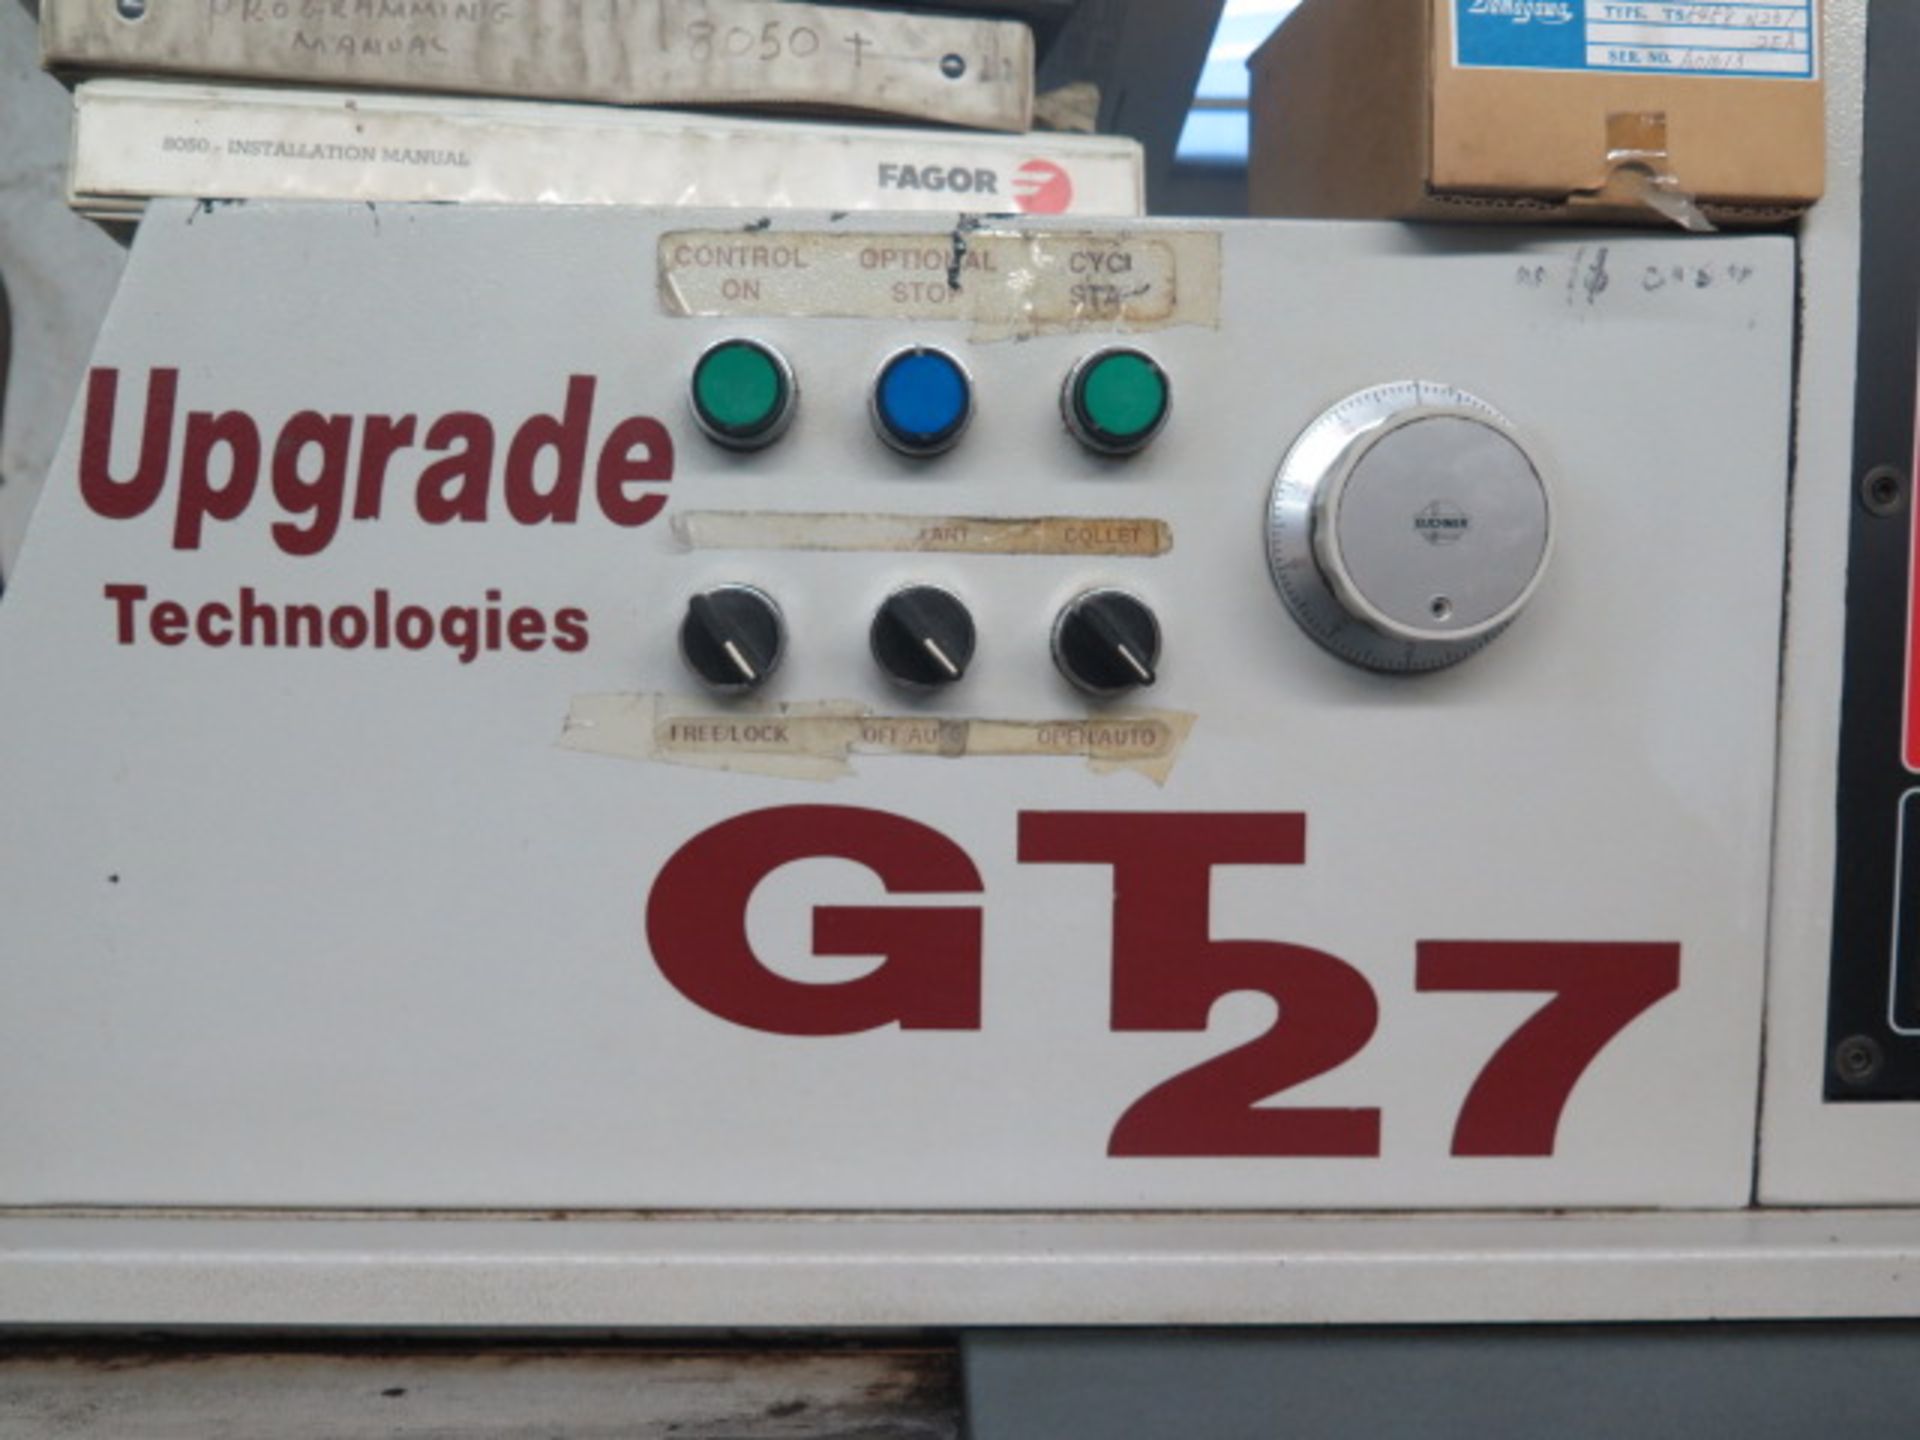 Upgrade Technologies “Compact GT27” CNC Cross Slide Lathe s/n DC572053E w/ Upgraded 8” Fagor - Image 9 of 13